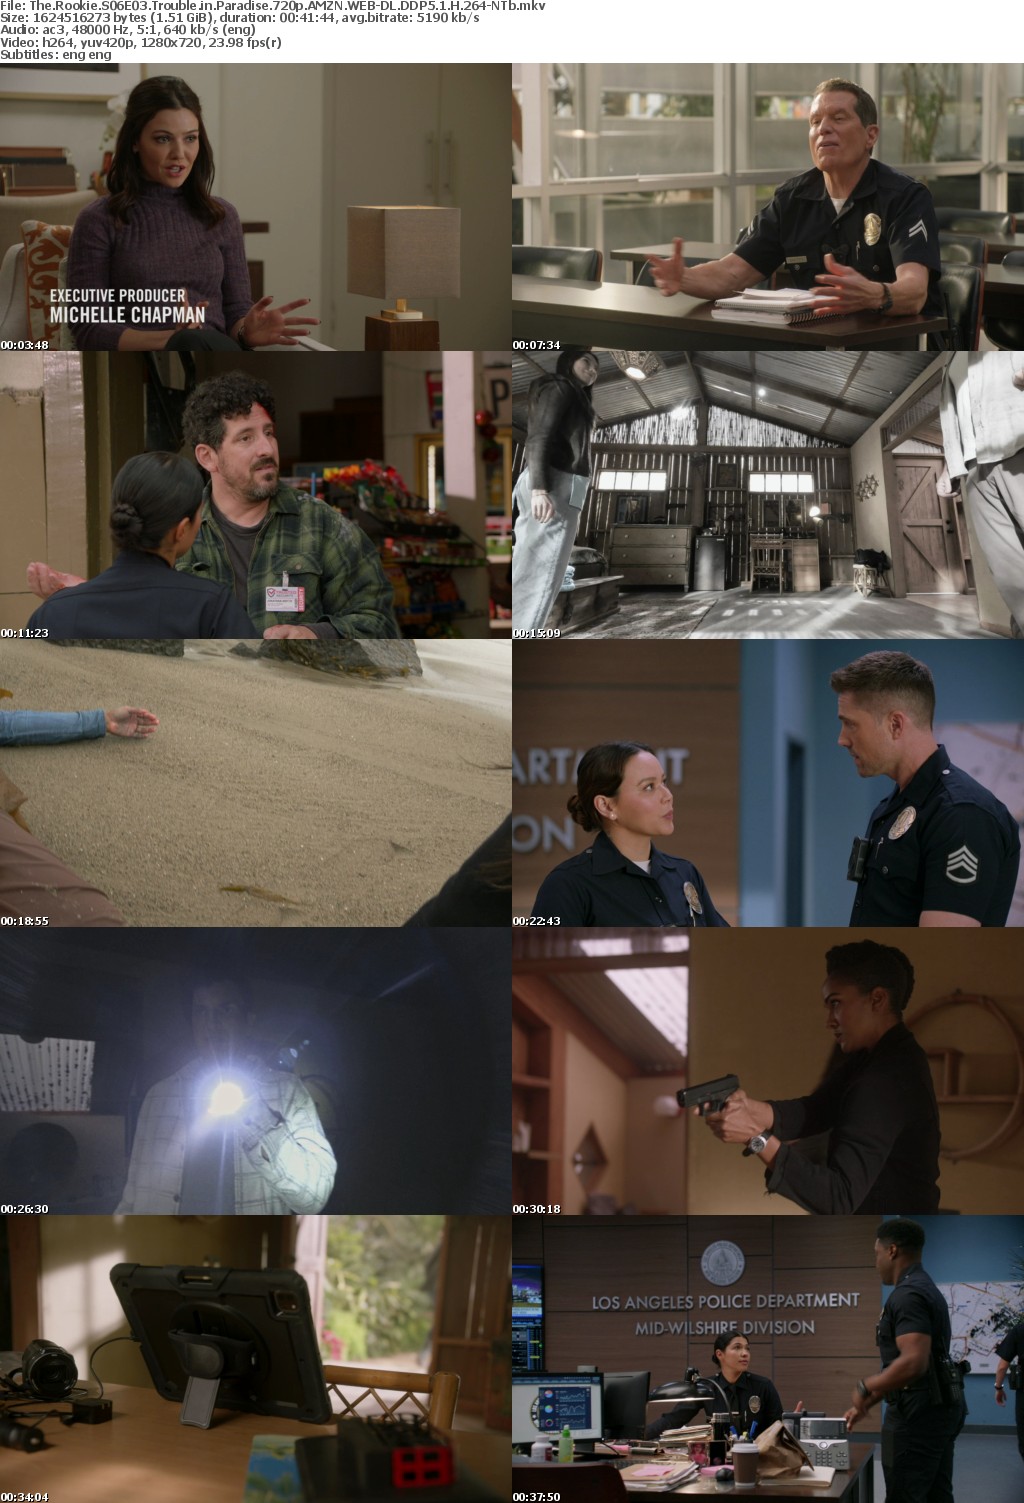 The Rookie S06E03 Trouble in Paradise 720p AMZN WEB-DL DDP5 1 H 264-NTb